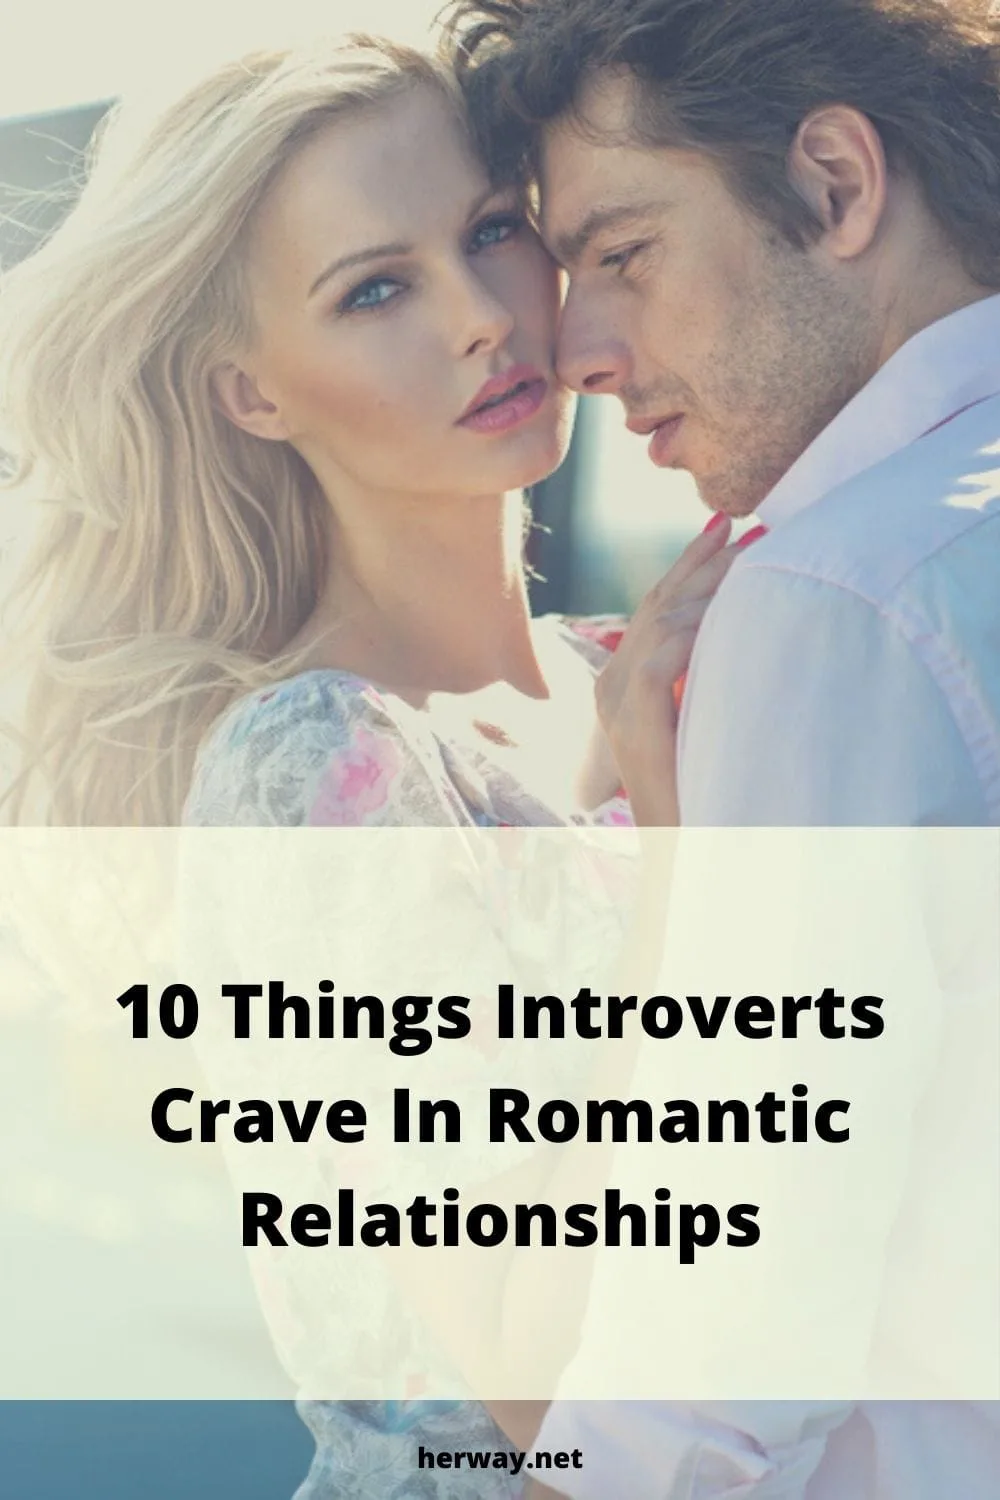 10 Things Introverts Crave In Romantic Relationships